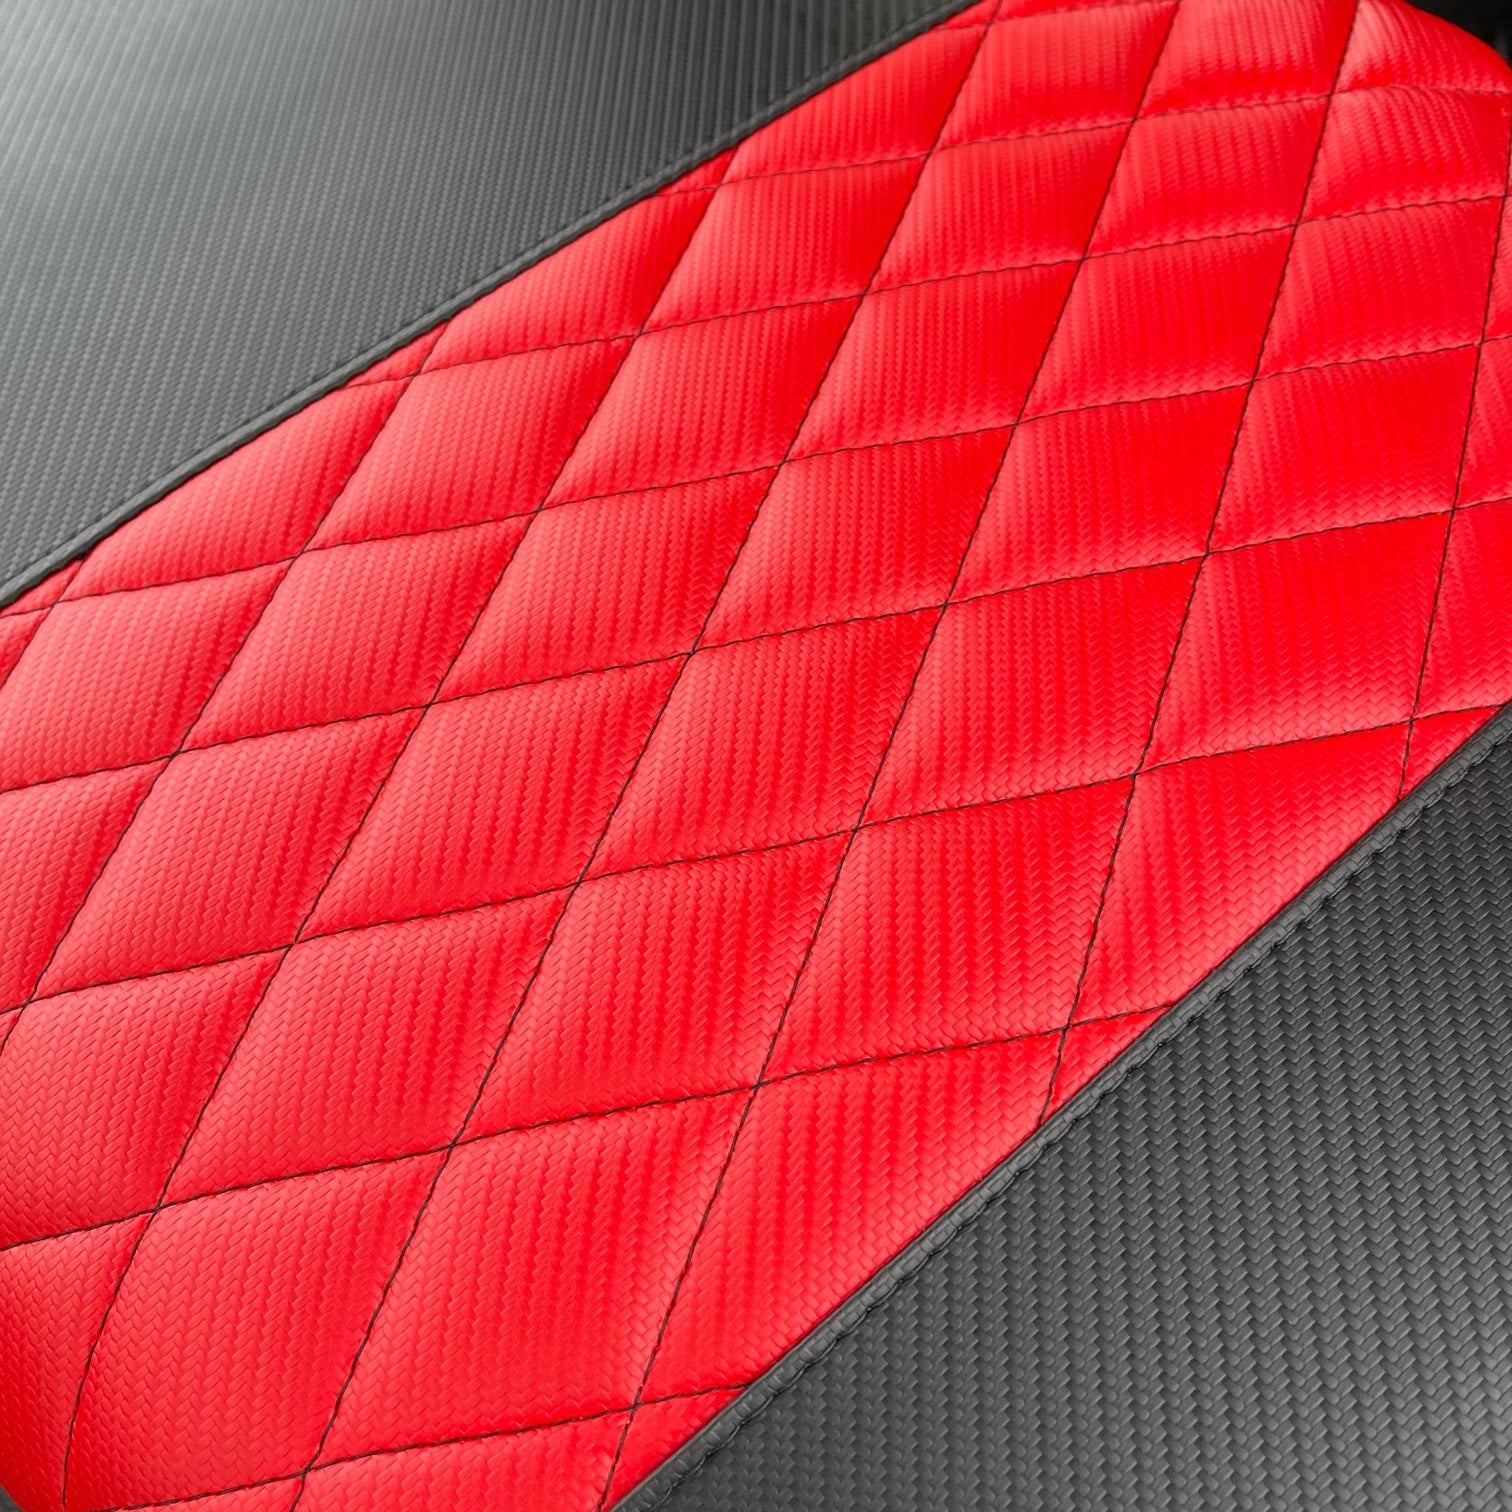 Club Car Golf Seat Covers for 6 Passenger Limo - Carbon Black with Diamond Red Carbon and Red Stitching